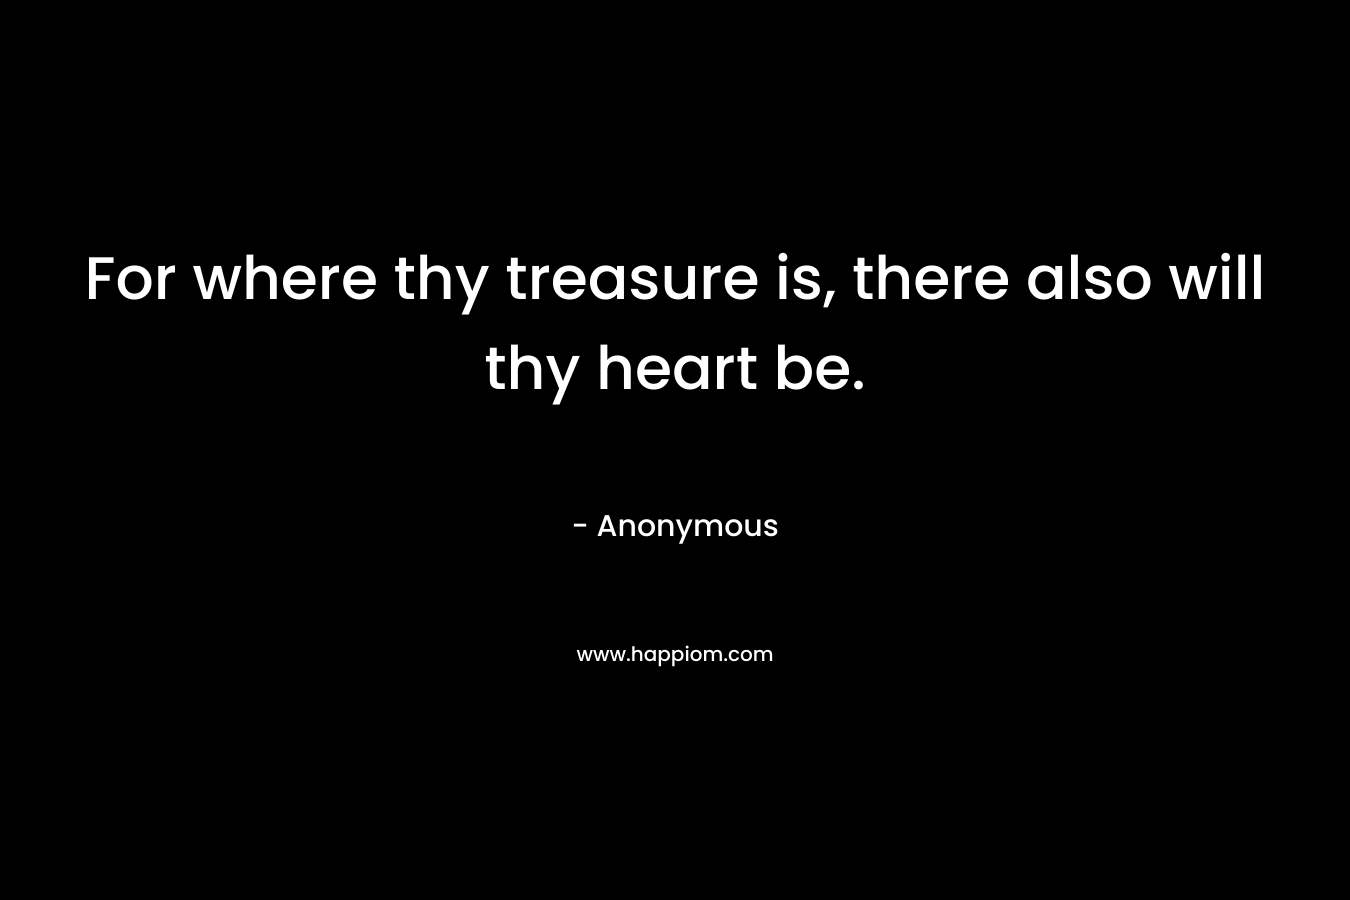 For where thy treasure is, there also will thy heart be.